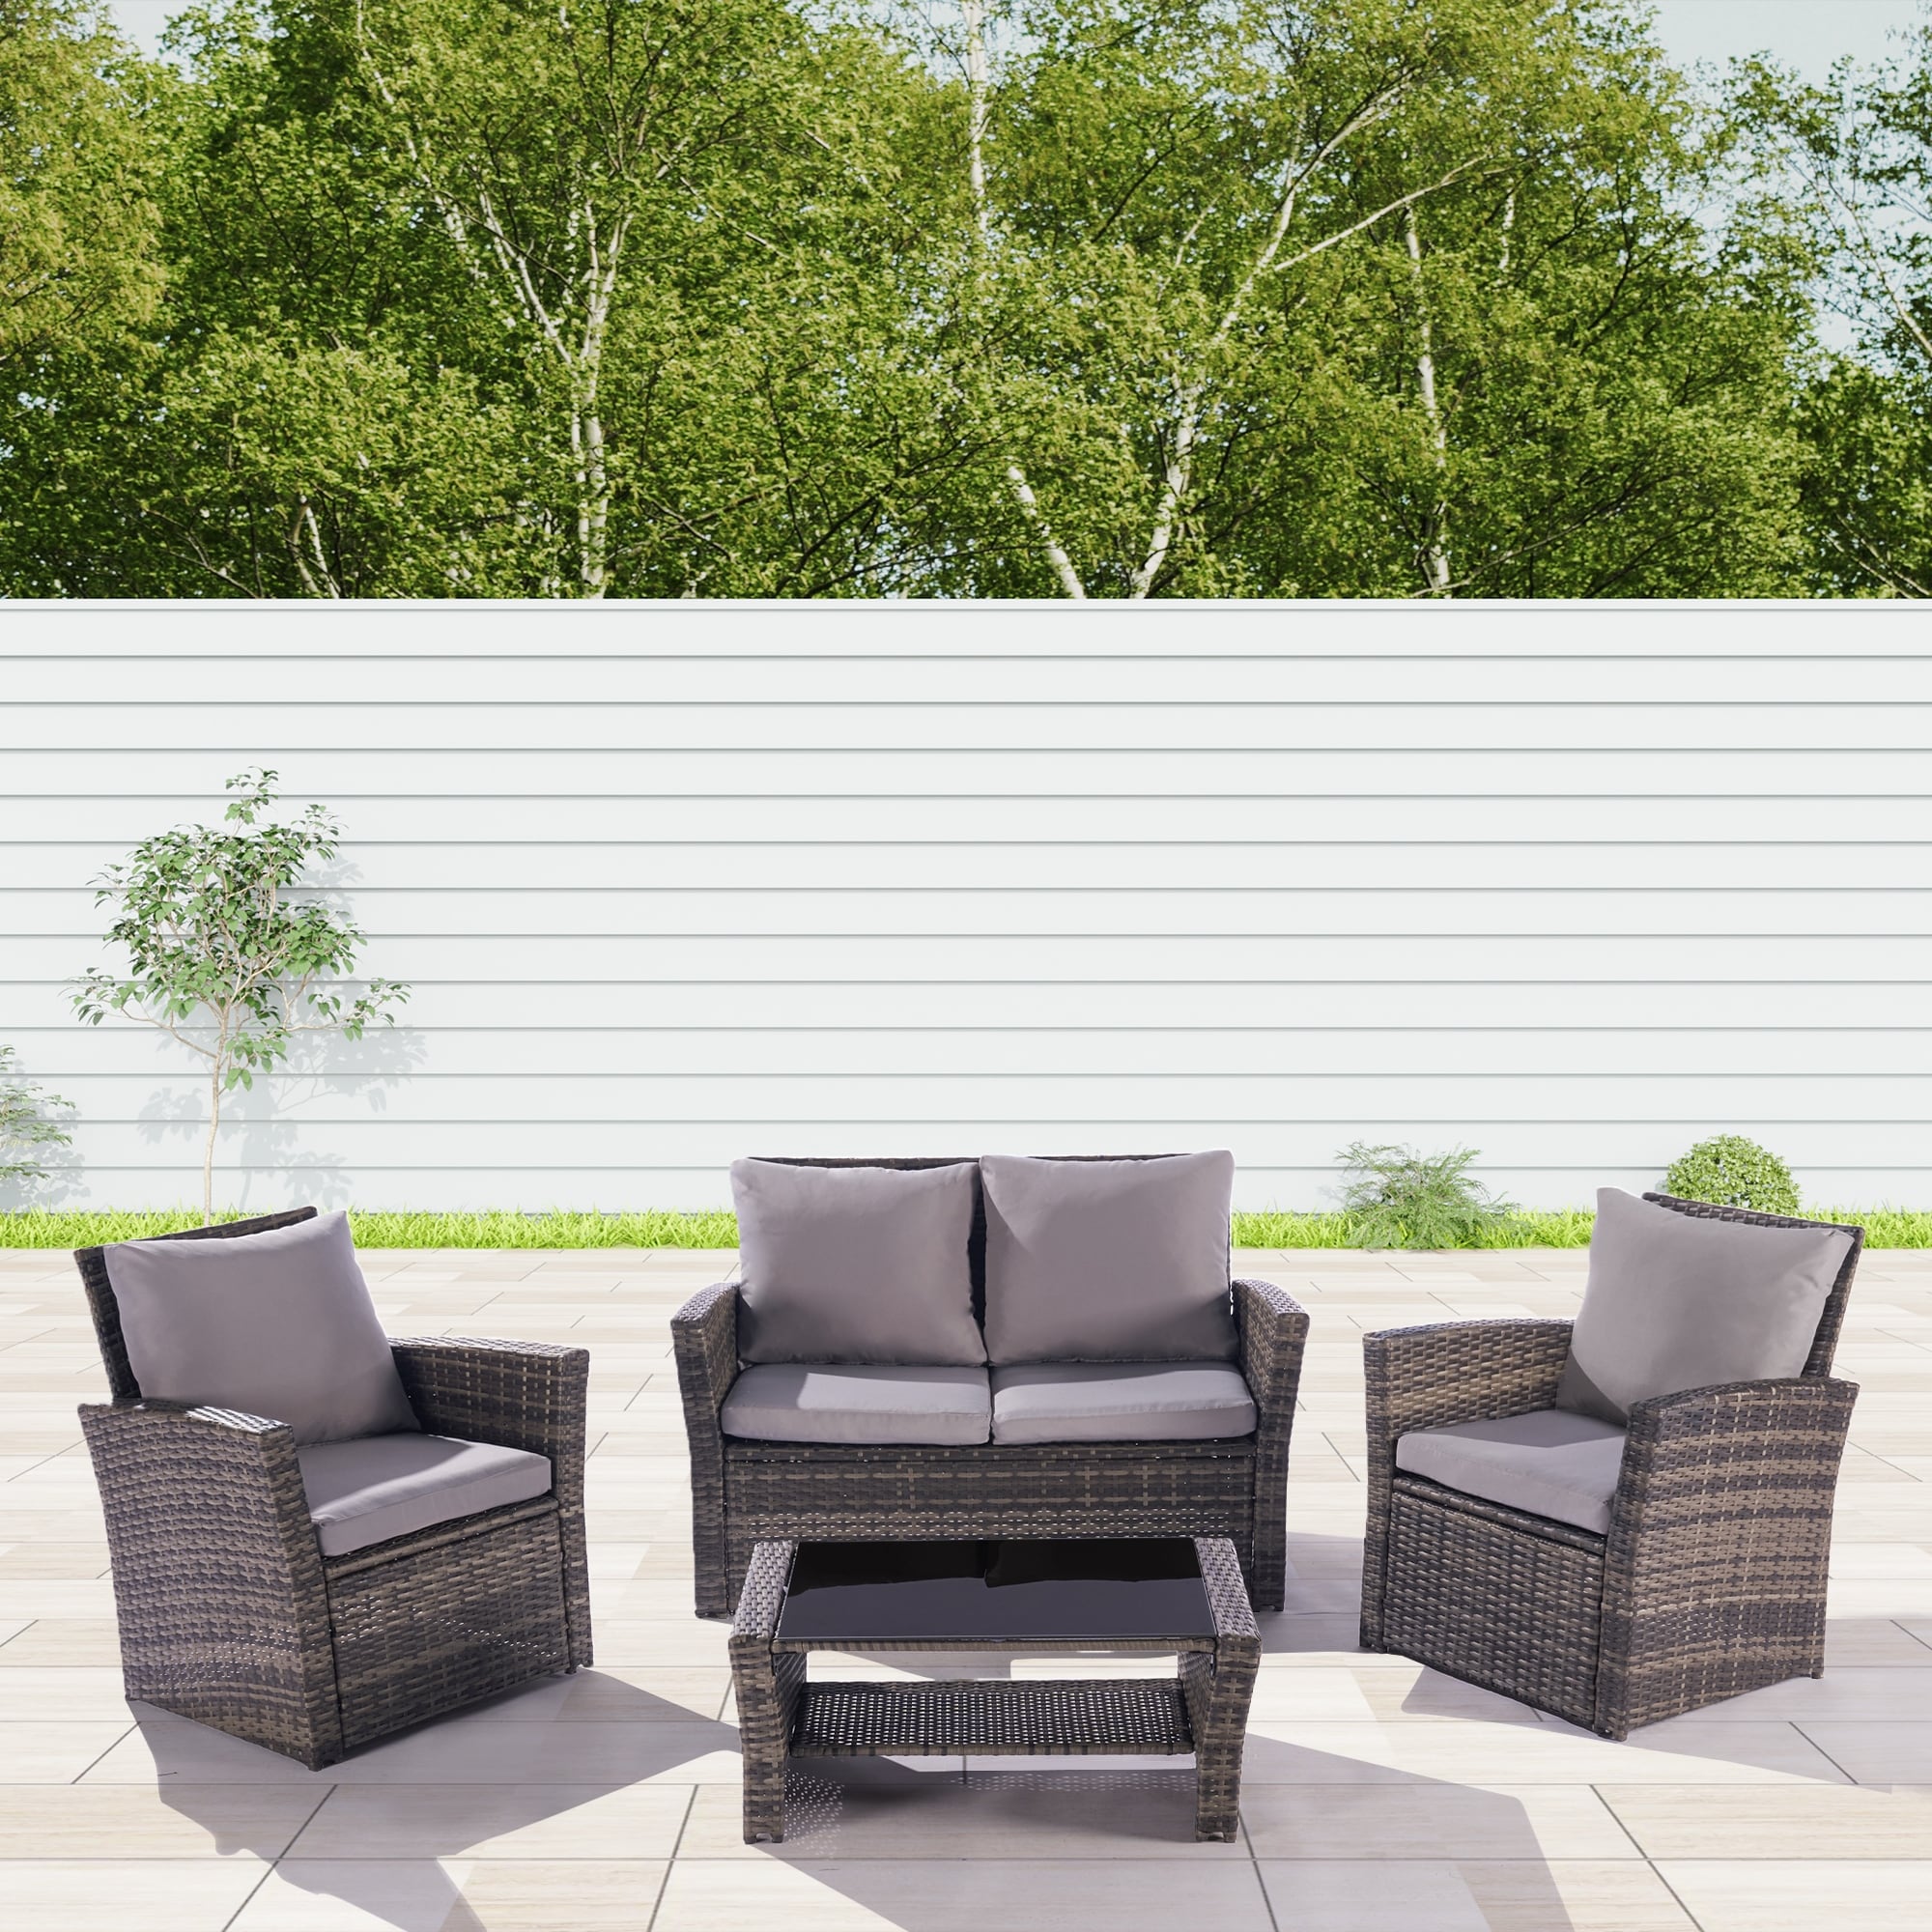 4-piece Pe Rattan Wicker Conversation Sofa Set For 4  Outdoor Garden Patio Furniture With Cushions For Any Outdoor Setting